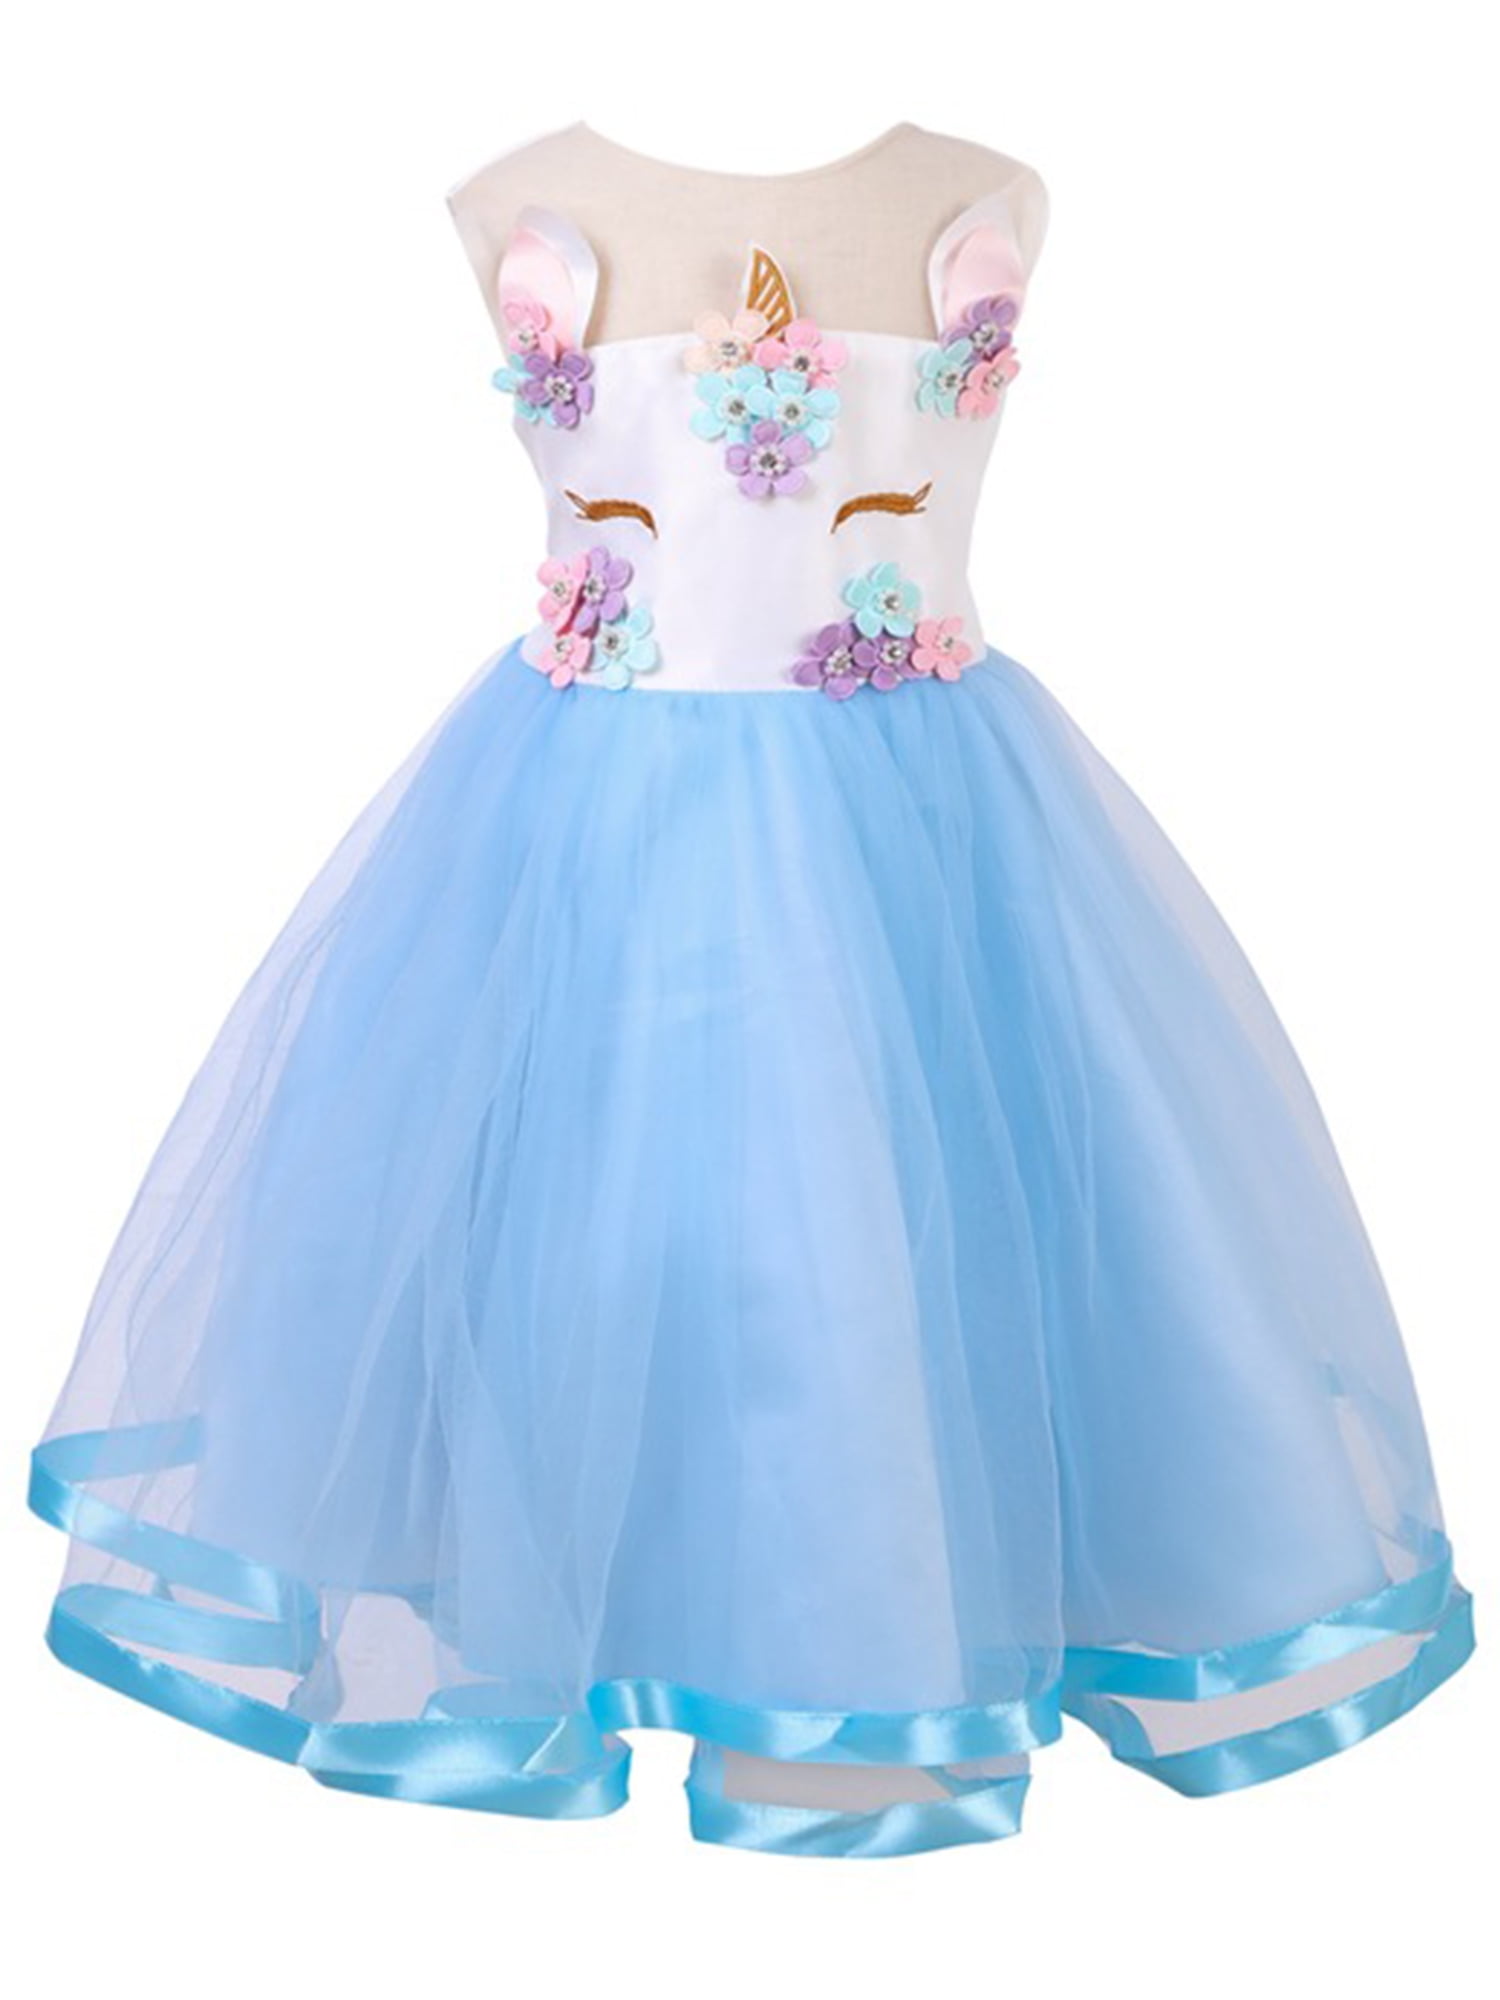 Kids Princess Unicorn Dresses for Girls Halloween Cosplay Costume Party Clothing